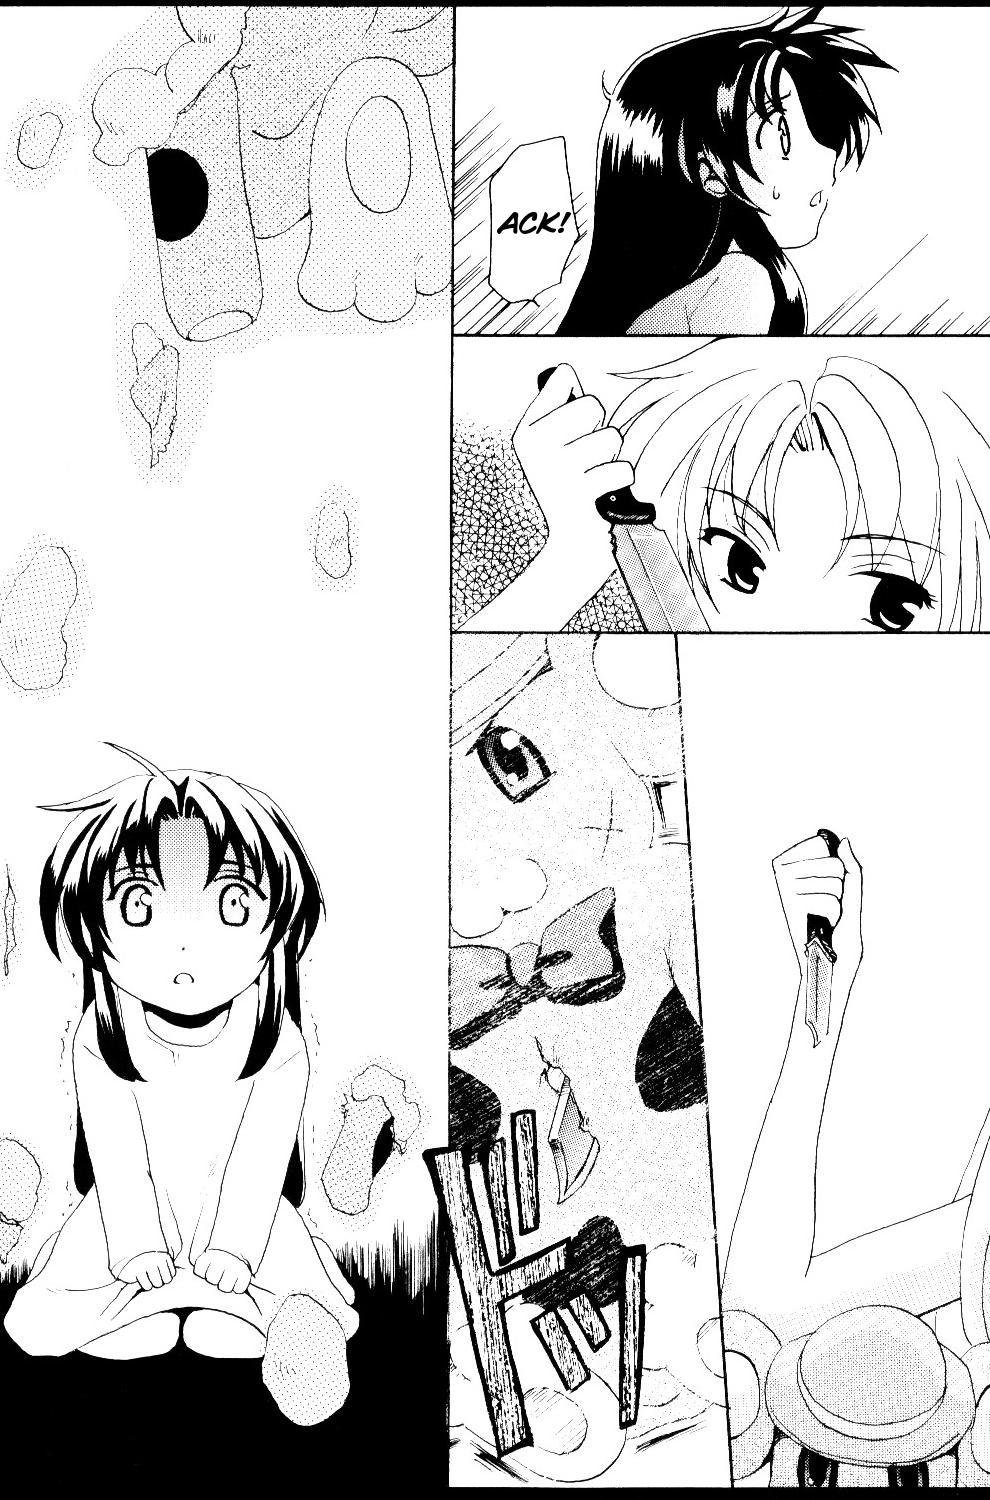 French Misomeru Futari | The Two Who Fall in Love at First Sight - Full metal panic Roundass - Page 9